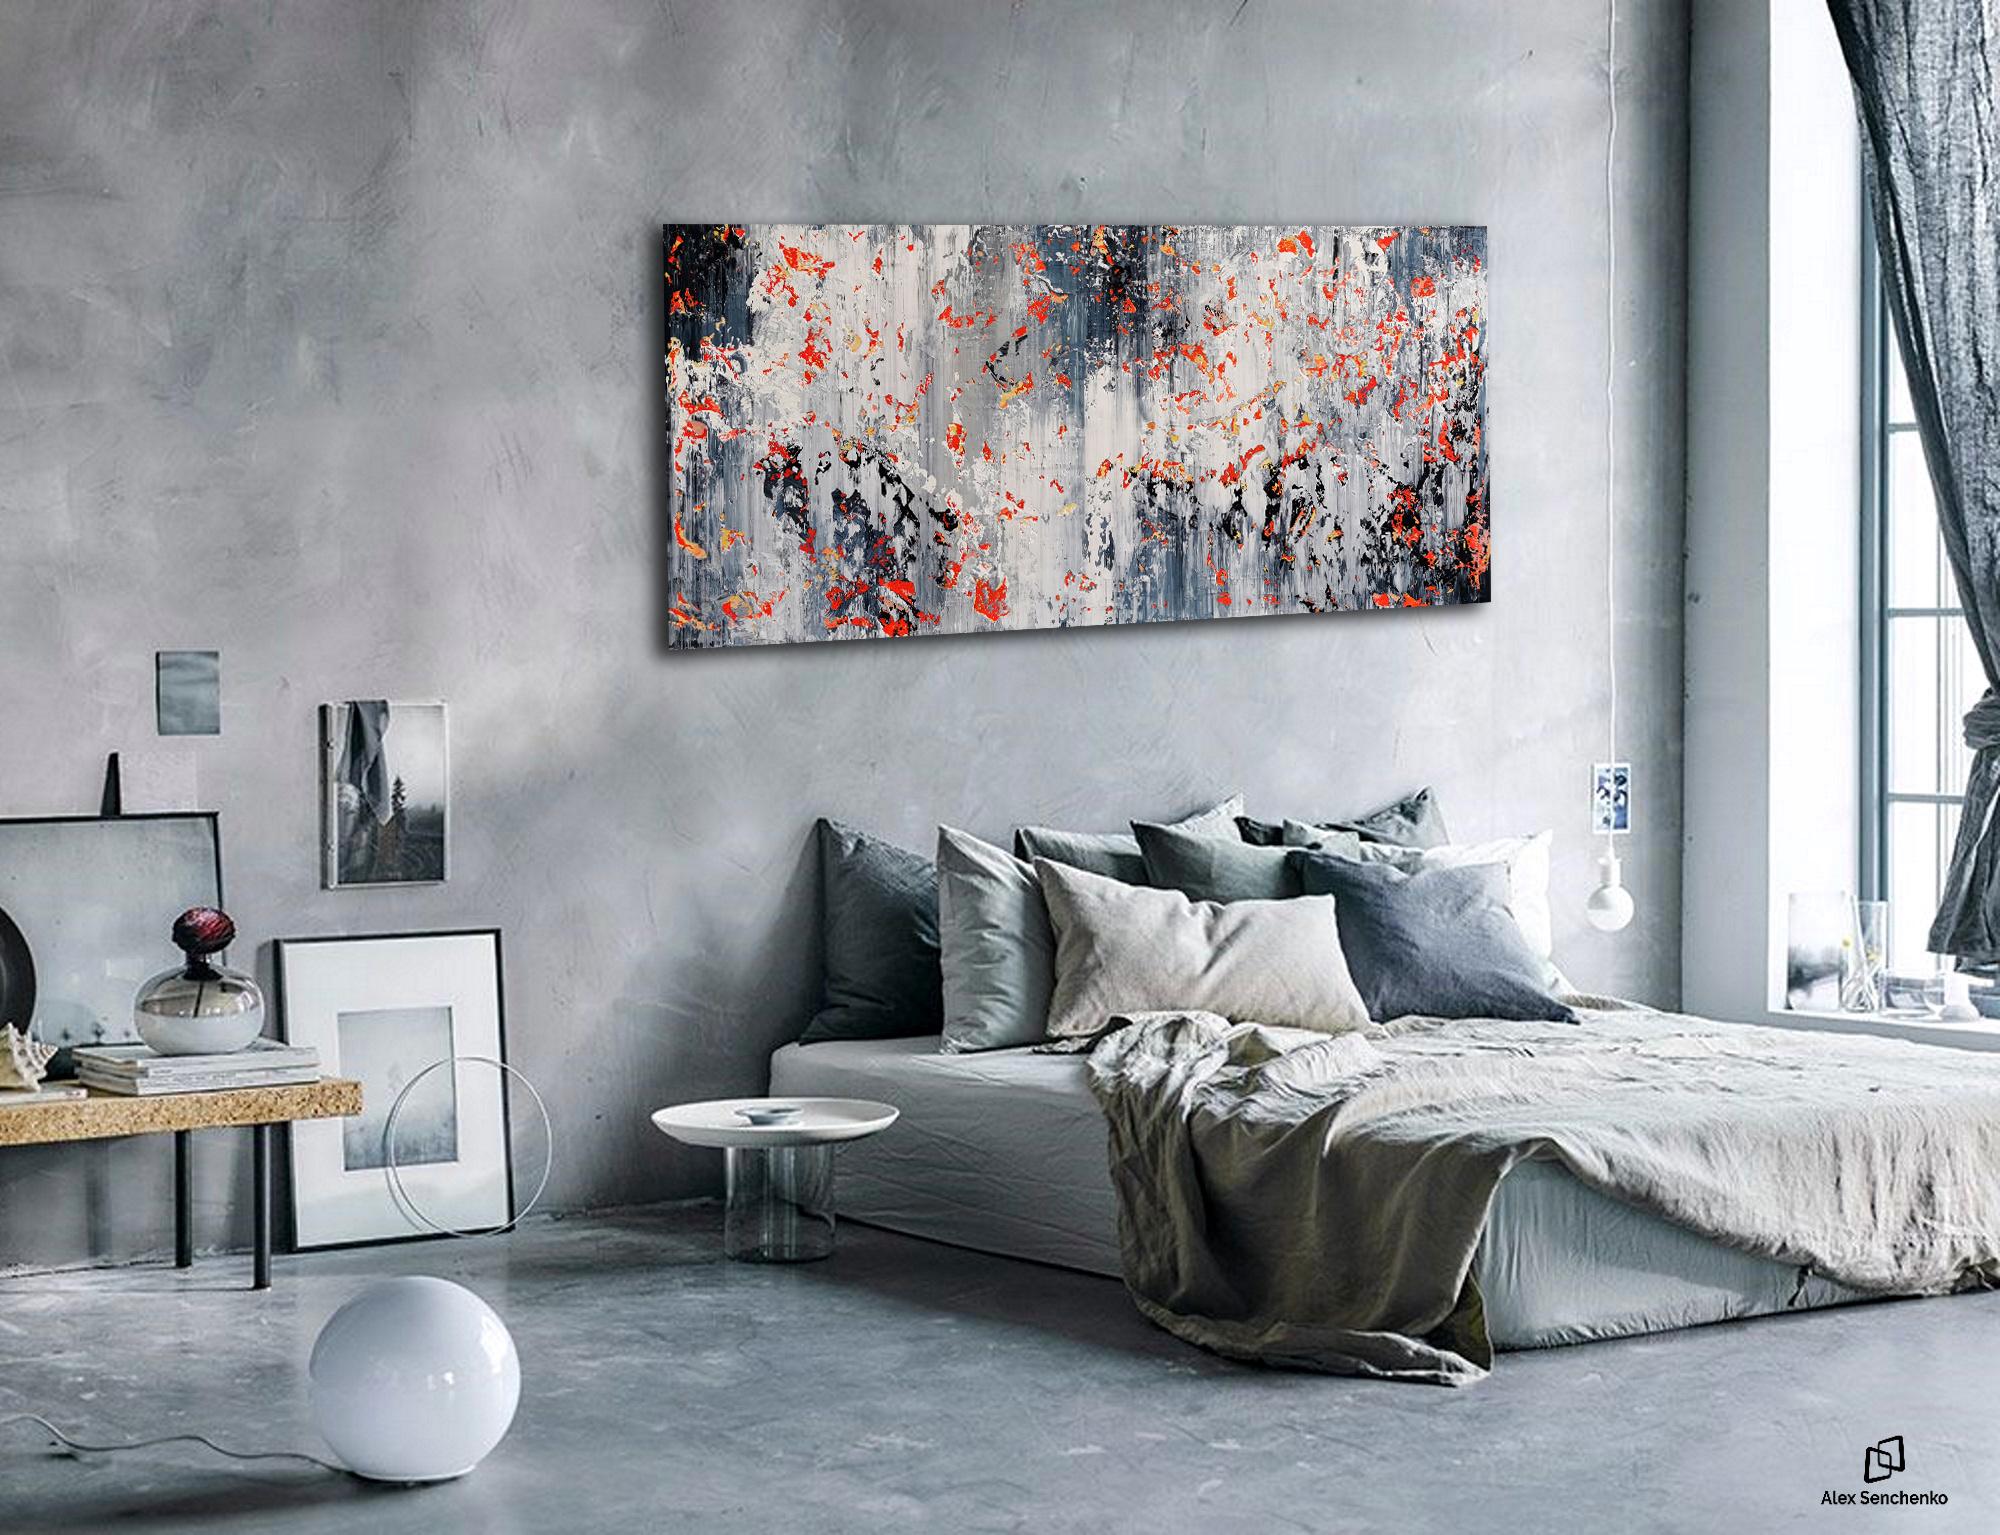 There’s something ethereal, almost magical, about contemporary paintings. The incredible Expressionism bleeds through the canvas, transforming any room into an entirely new experience. Alex Senchenko’s - Abstract 2259 - painting will give your space